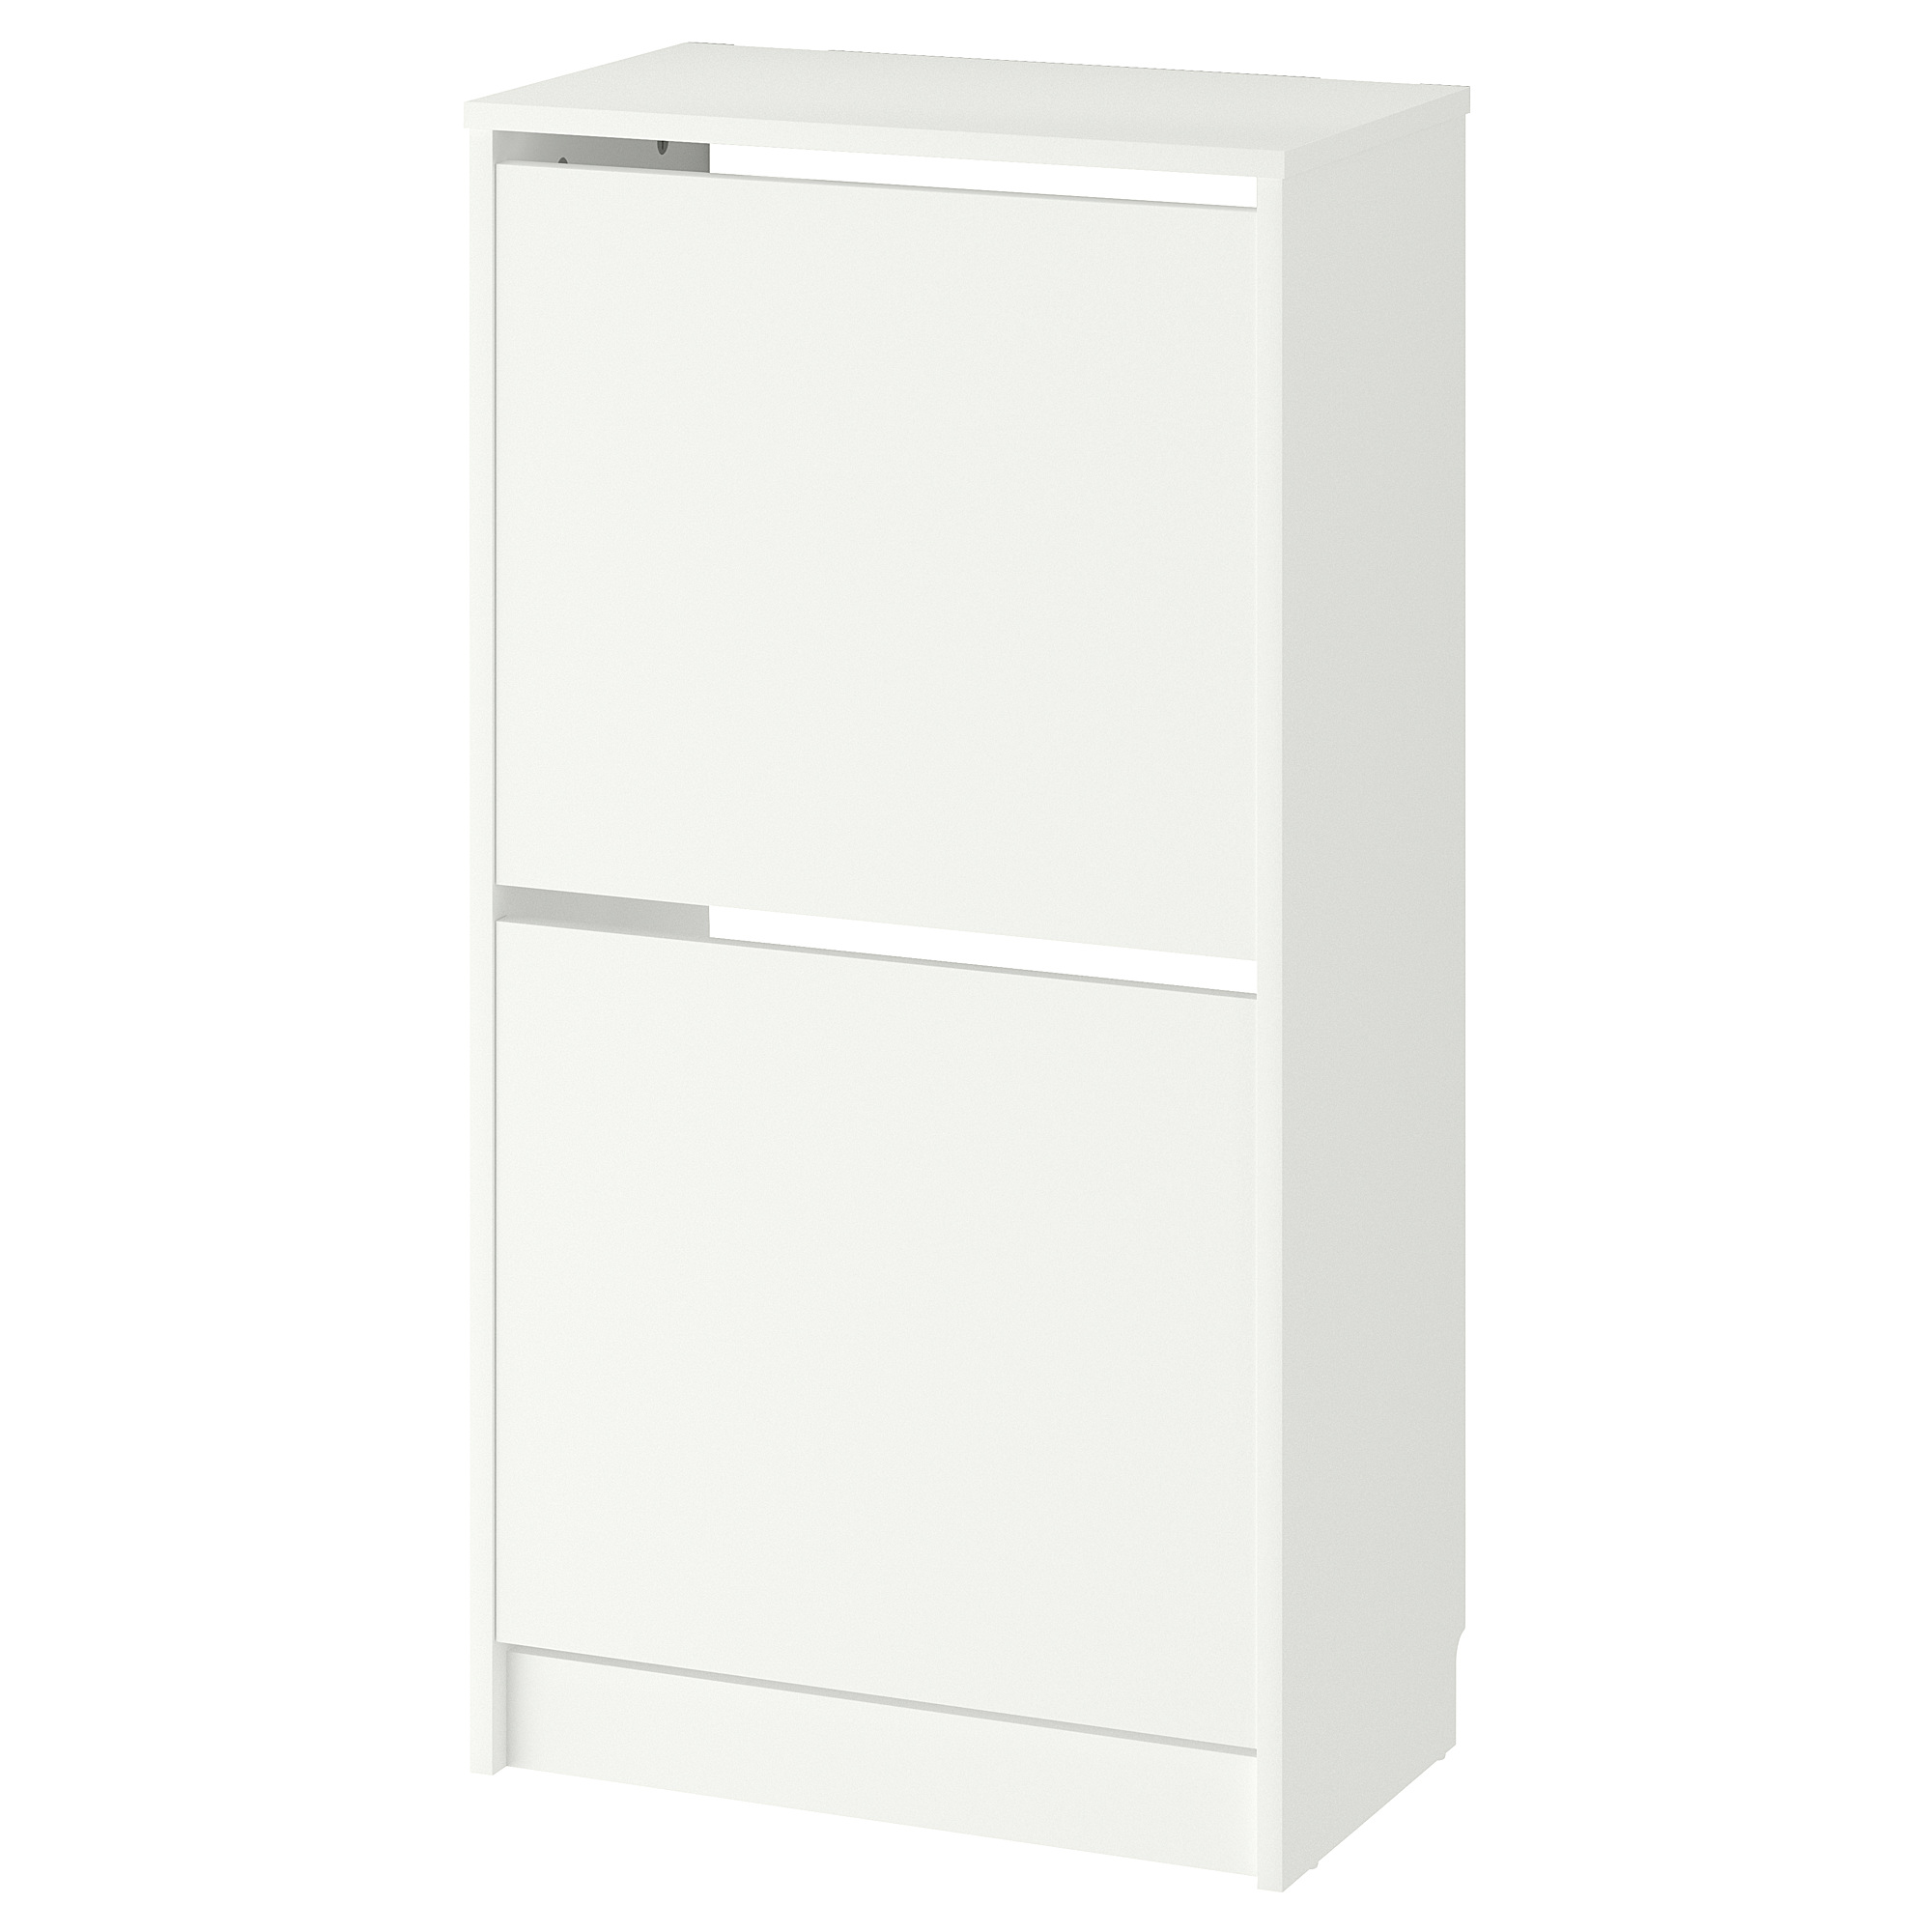 Bissa Shoe Cabinet With 2 Compartments White Ikea Hong Kong